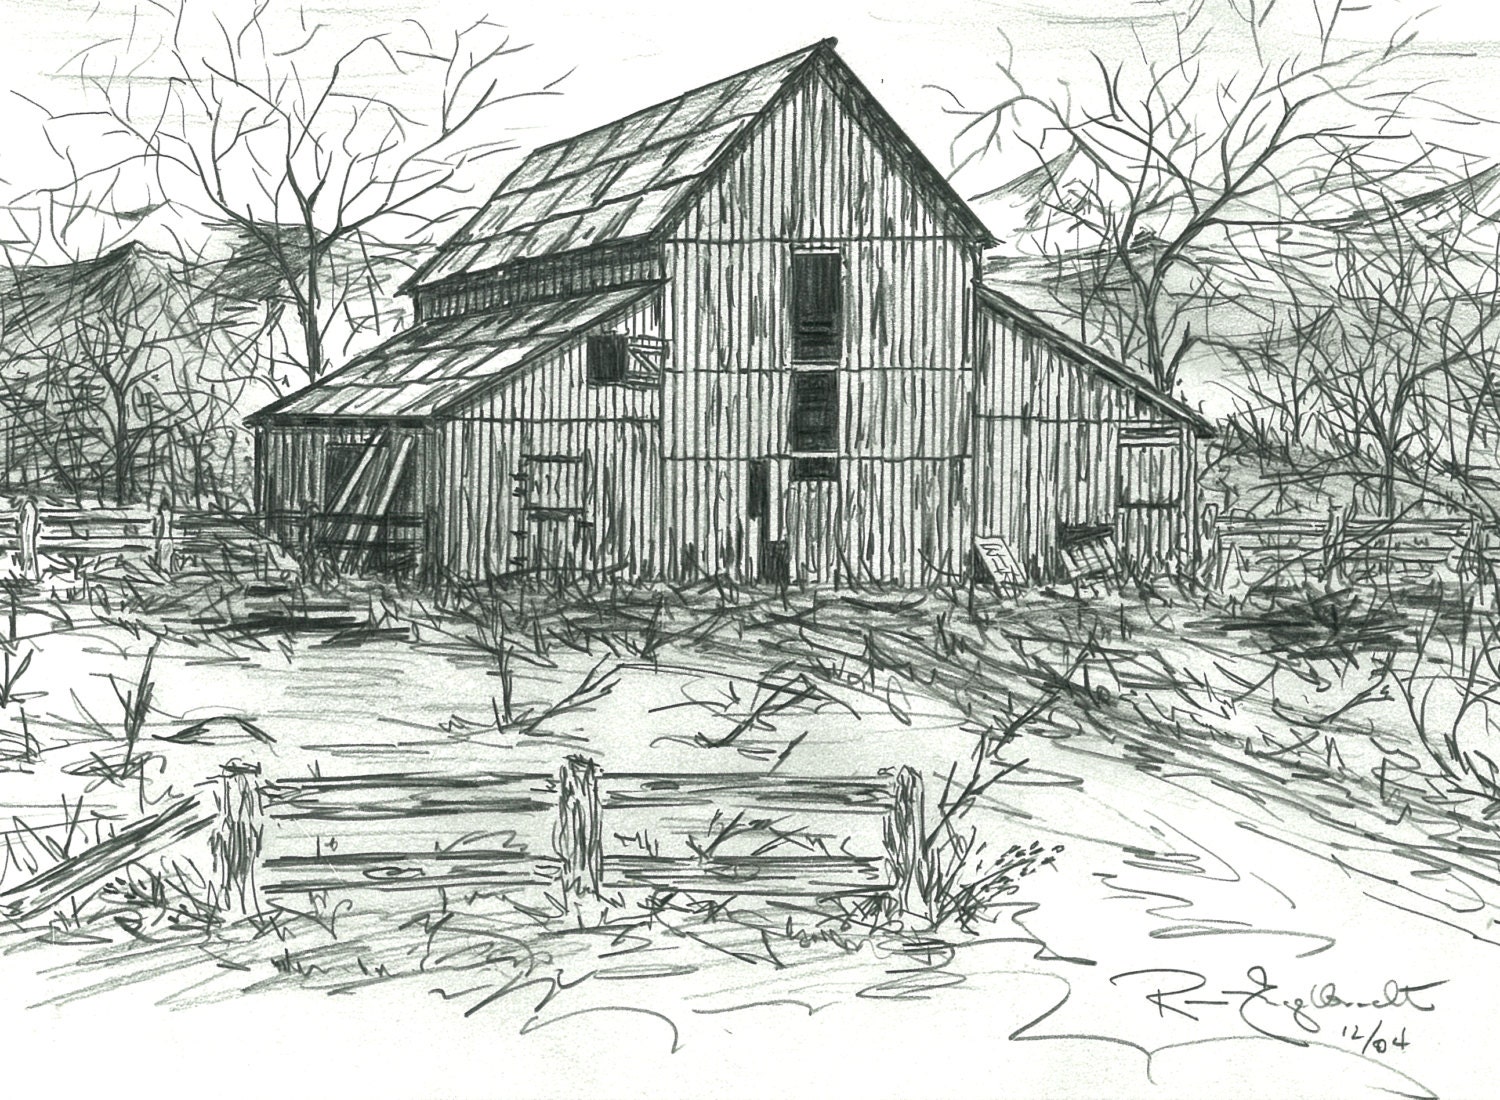 Easy Sketch Drawing Old Houses Cabins Barns Wagons with Pencil